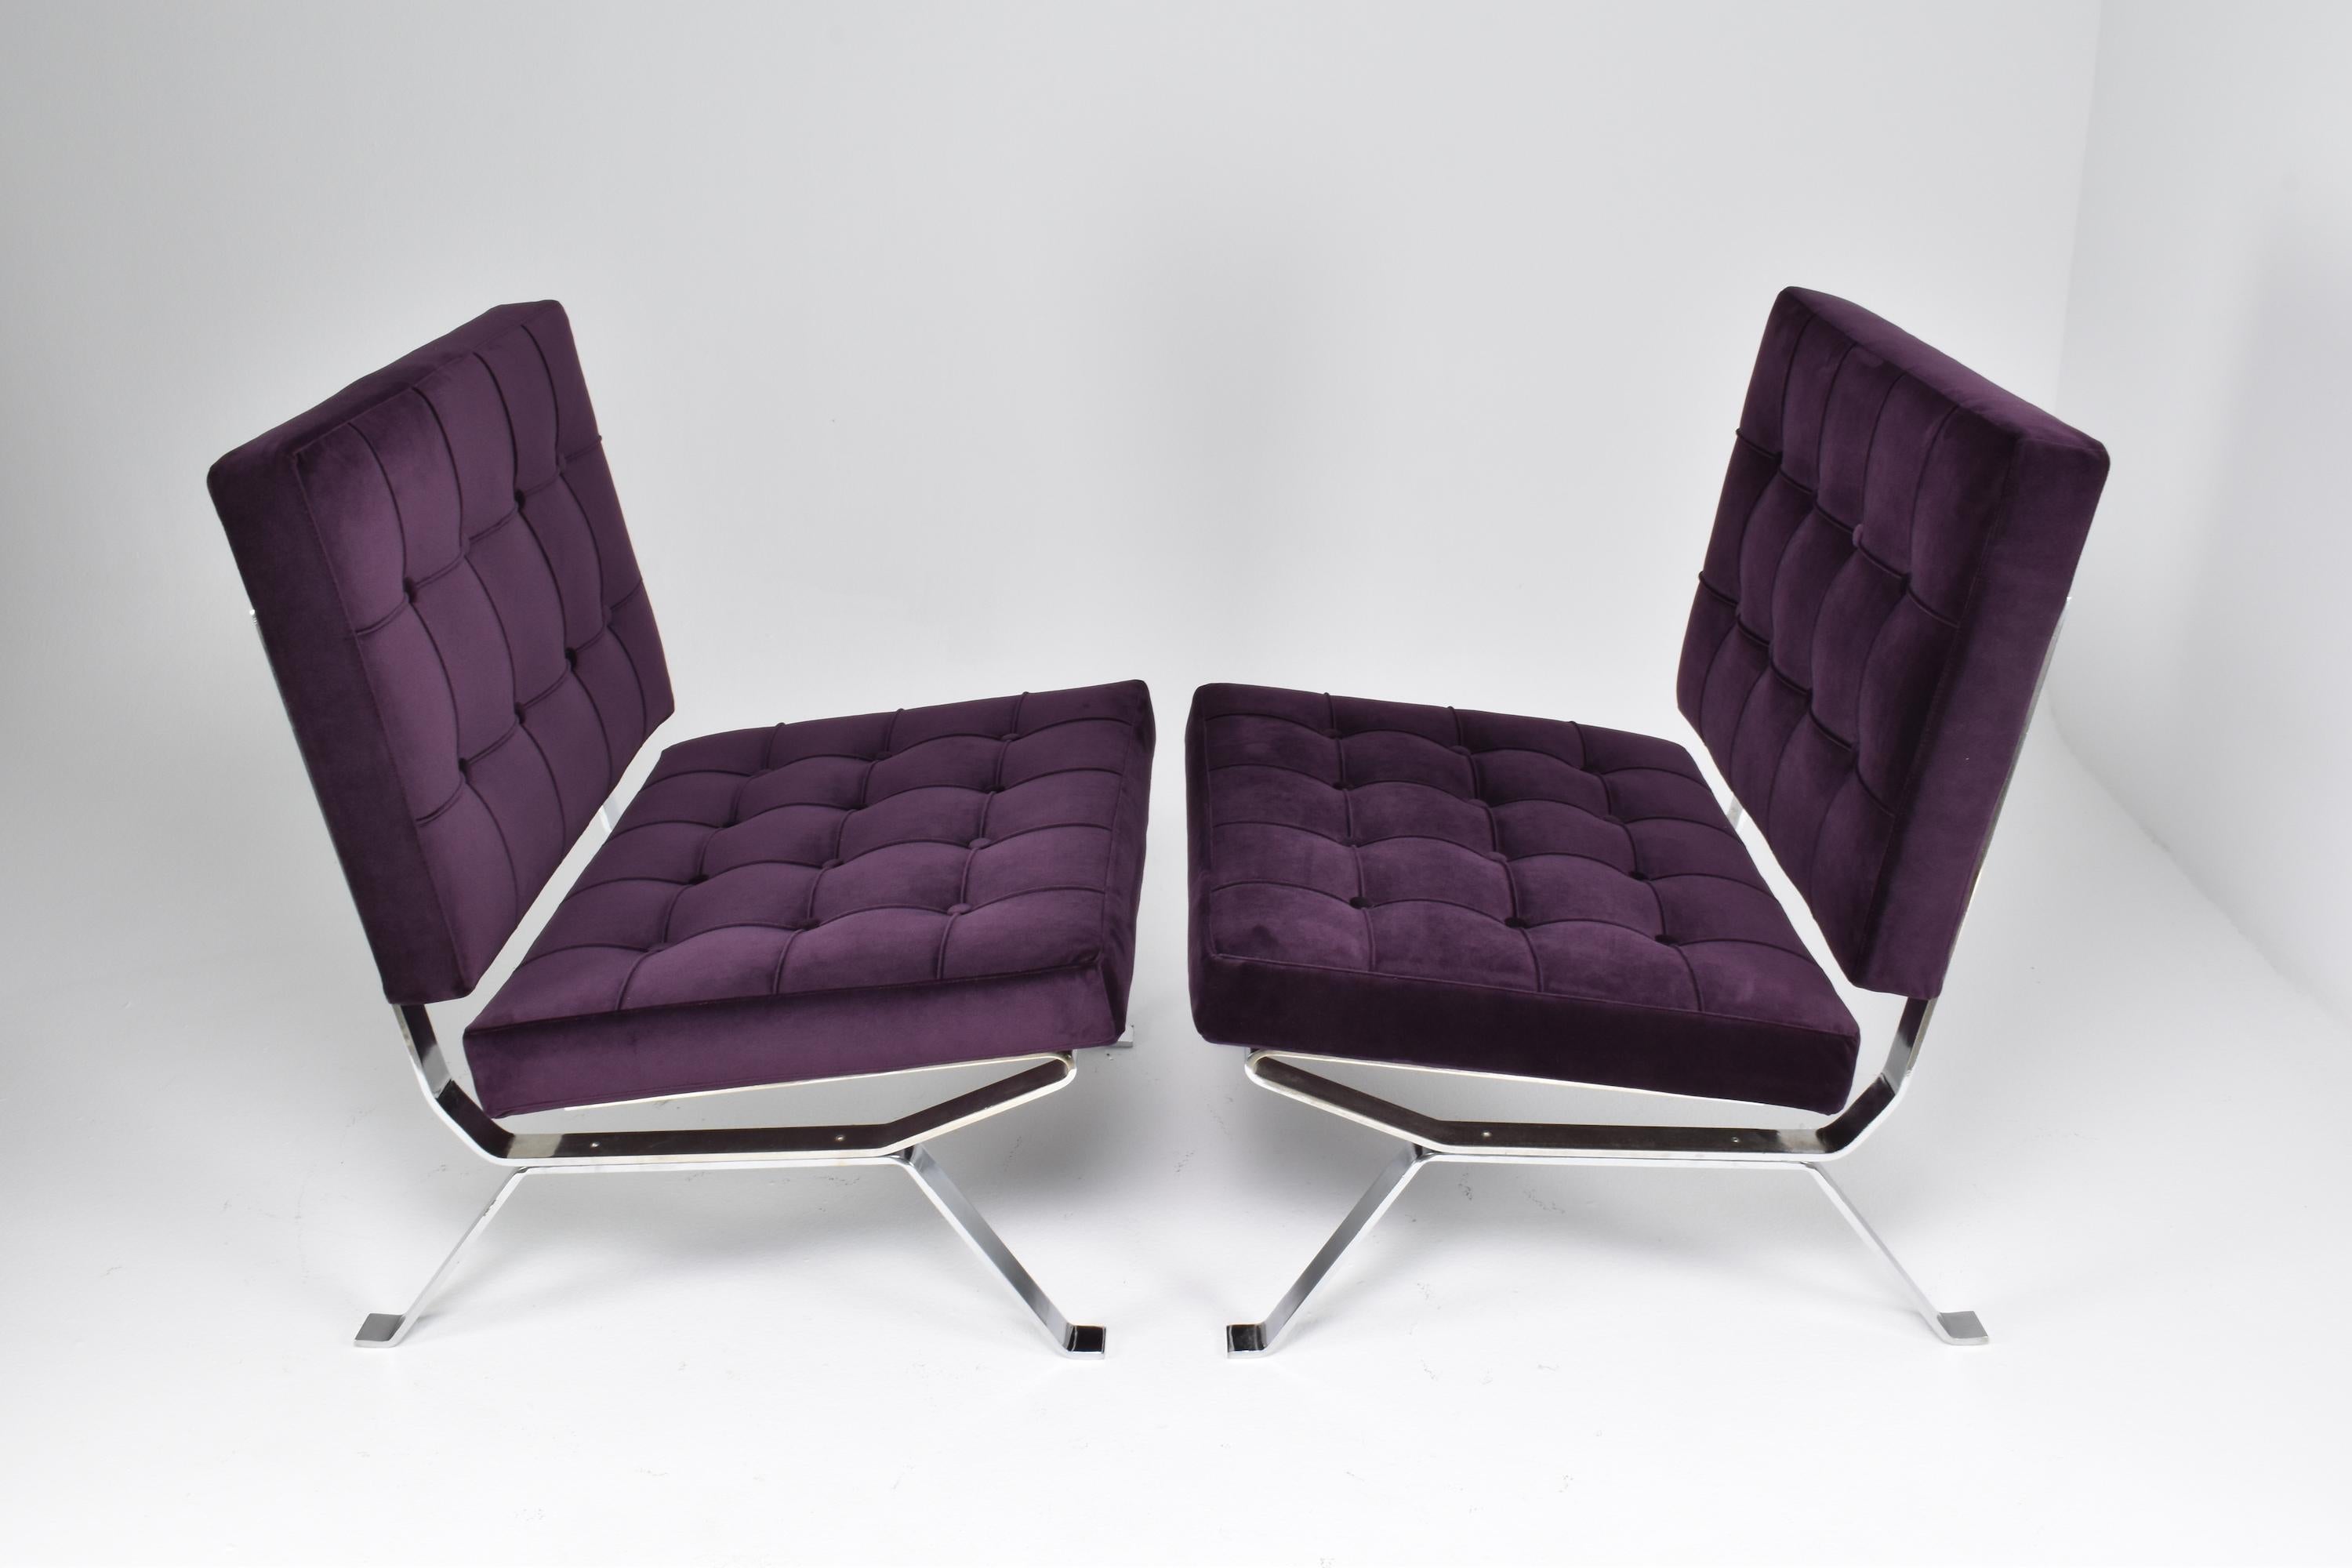 Pair of Italian Midcentury Dione Gastone Rinaldi Lounge Chairs, 1950s For Sale 4